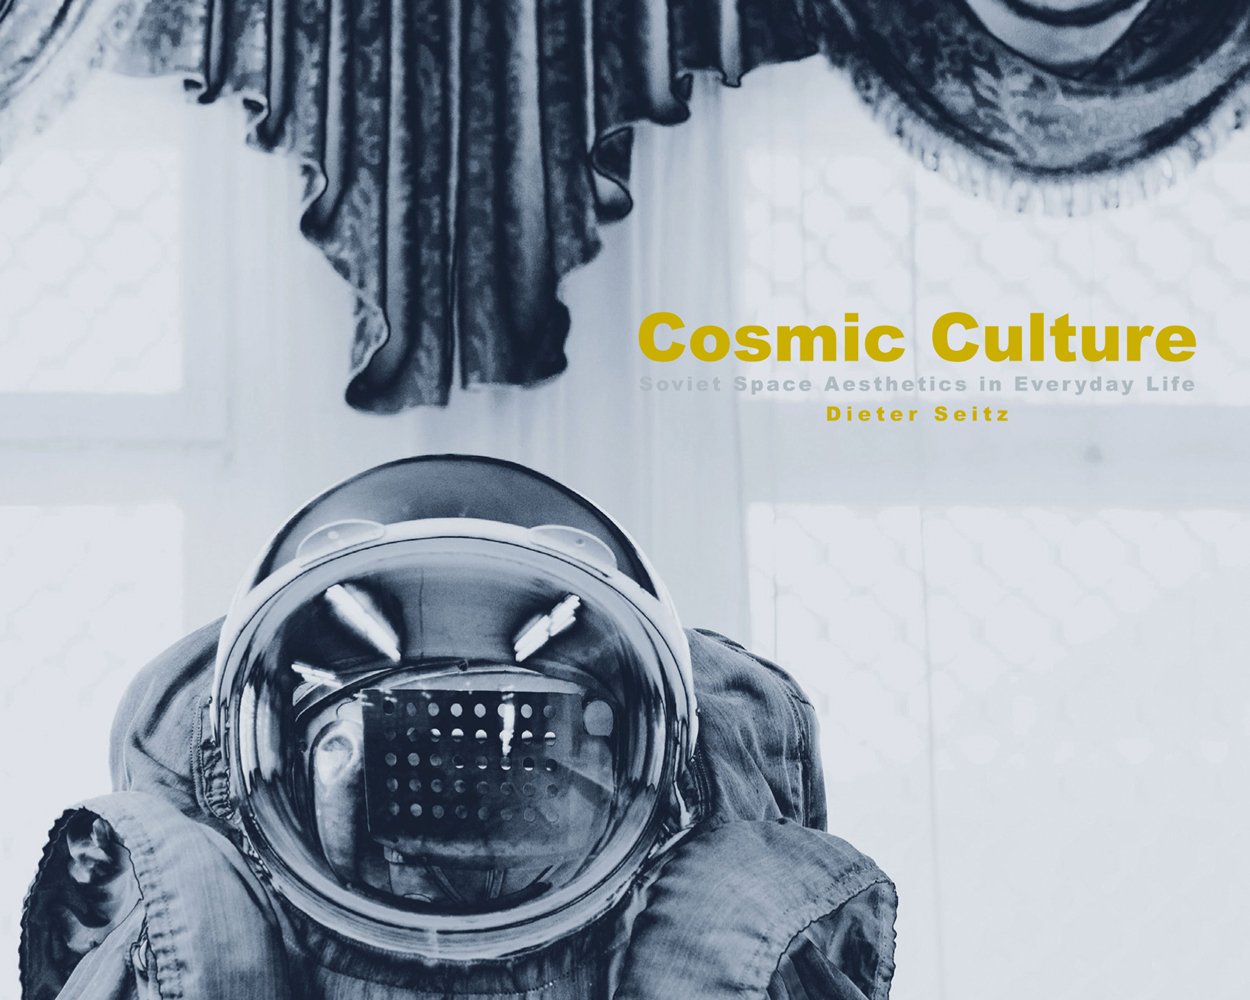 Landscape book cover of Cosmic Culture, Soviet Space Aesthetics in Everyday Life, featuring a Cosmonaut in helmet and suit, with drapes behind. Published by Verlag Kettler.